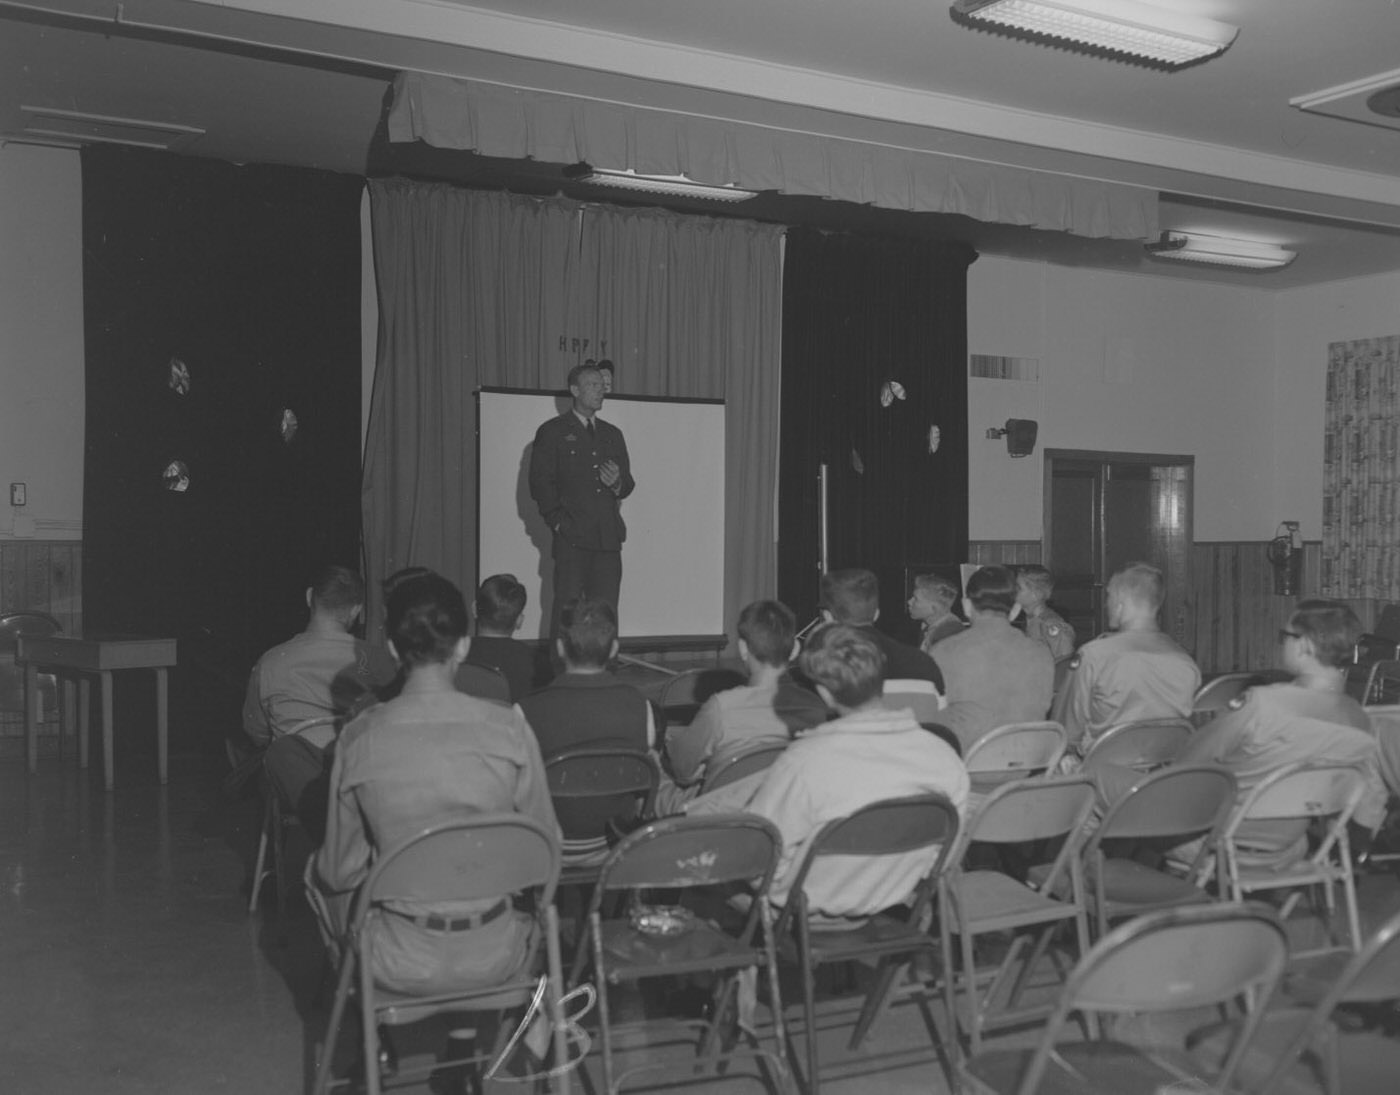 Military Presentation by Officer to Seated Soldiers, 1950s.